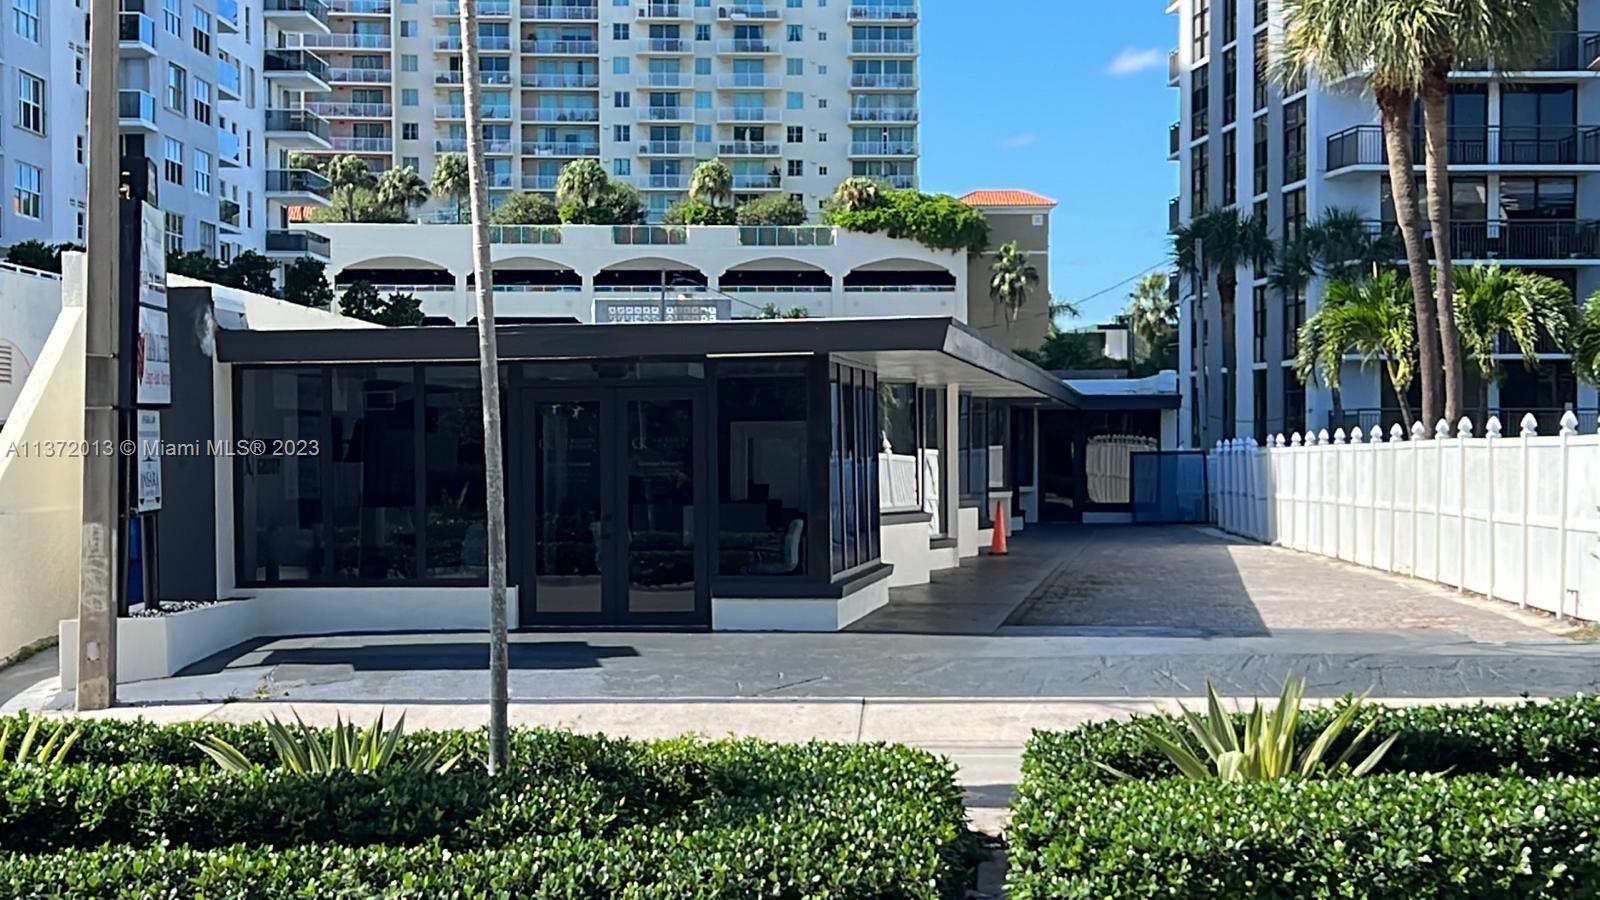 Prime location ,A1A and Oakland 440  sf retail space, can be used for law office , barber shop ,liquor/ convenient stores and more , the building was completely renovated and new impact glass and doors  installed . for additional parking there is public parking garage behind the building .